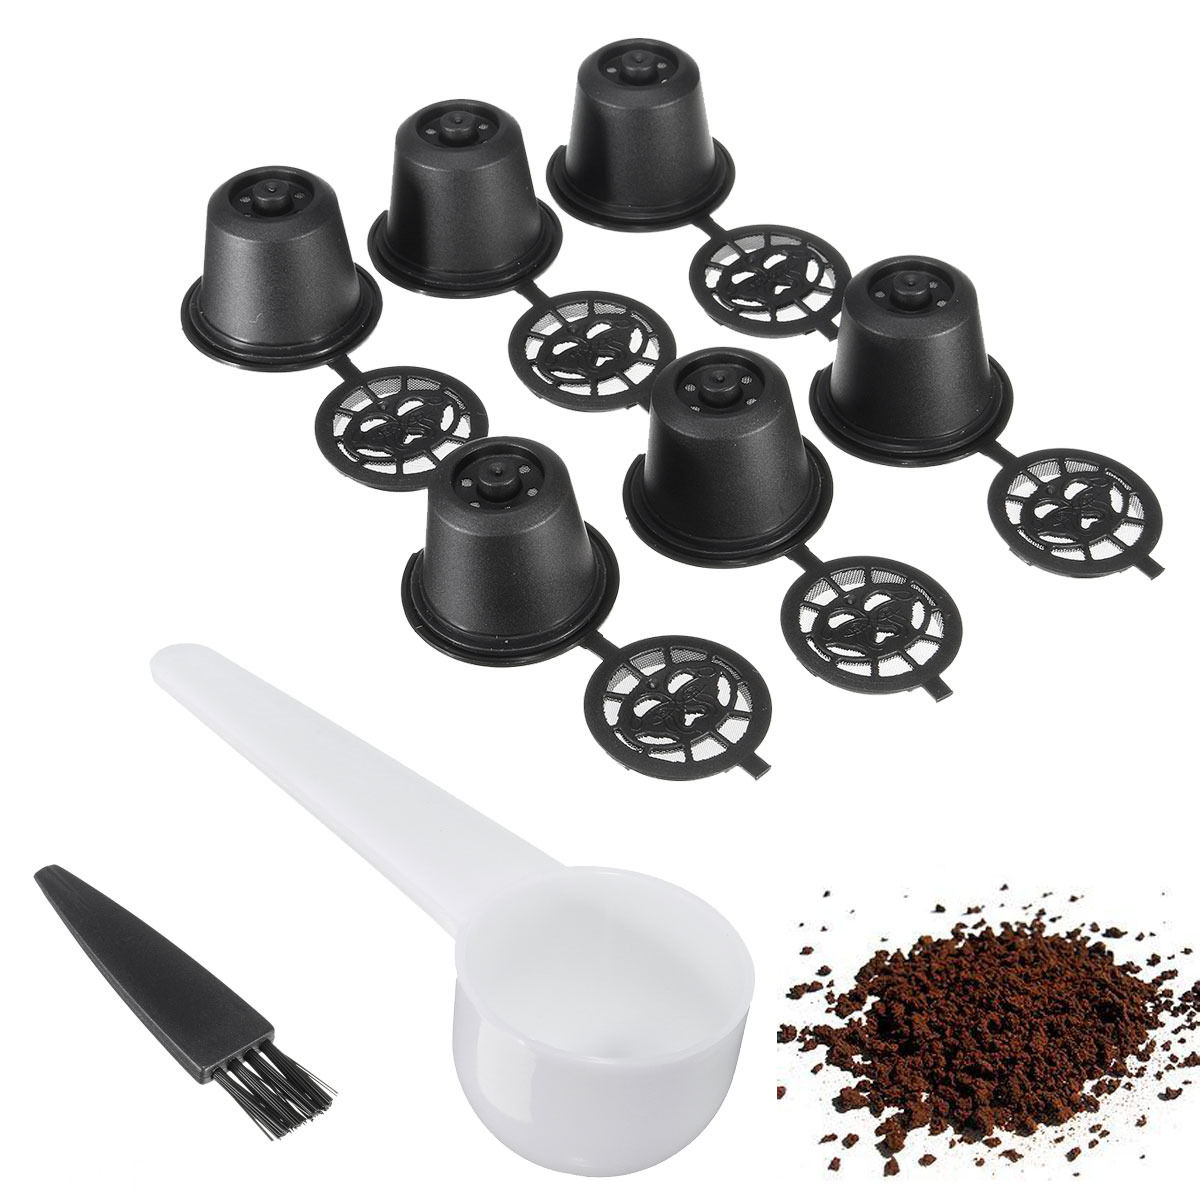 8 Pcs Sets Black Refillable Coffee Capsule Cup Reusable Refilling Filter For Nespresso Machine With Brush